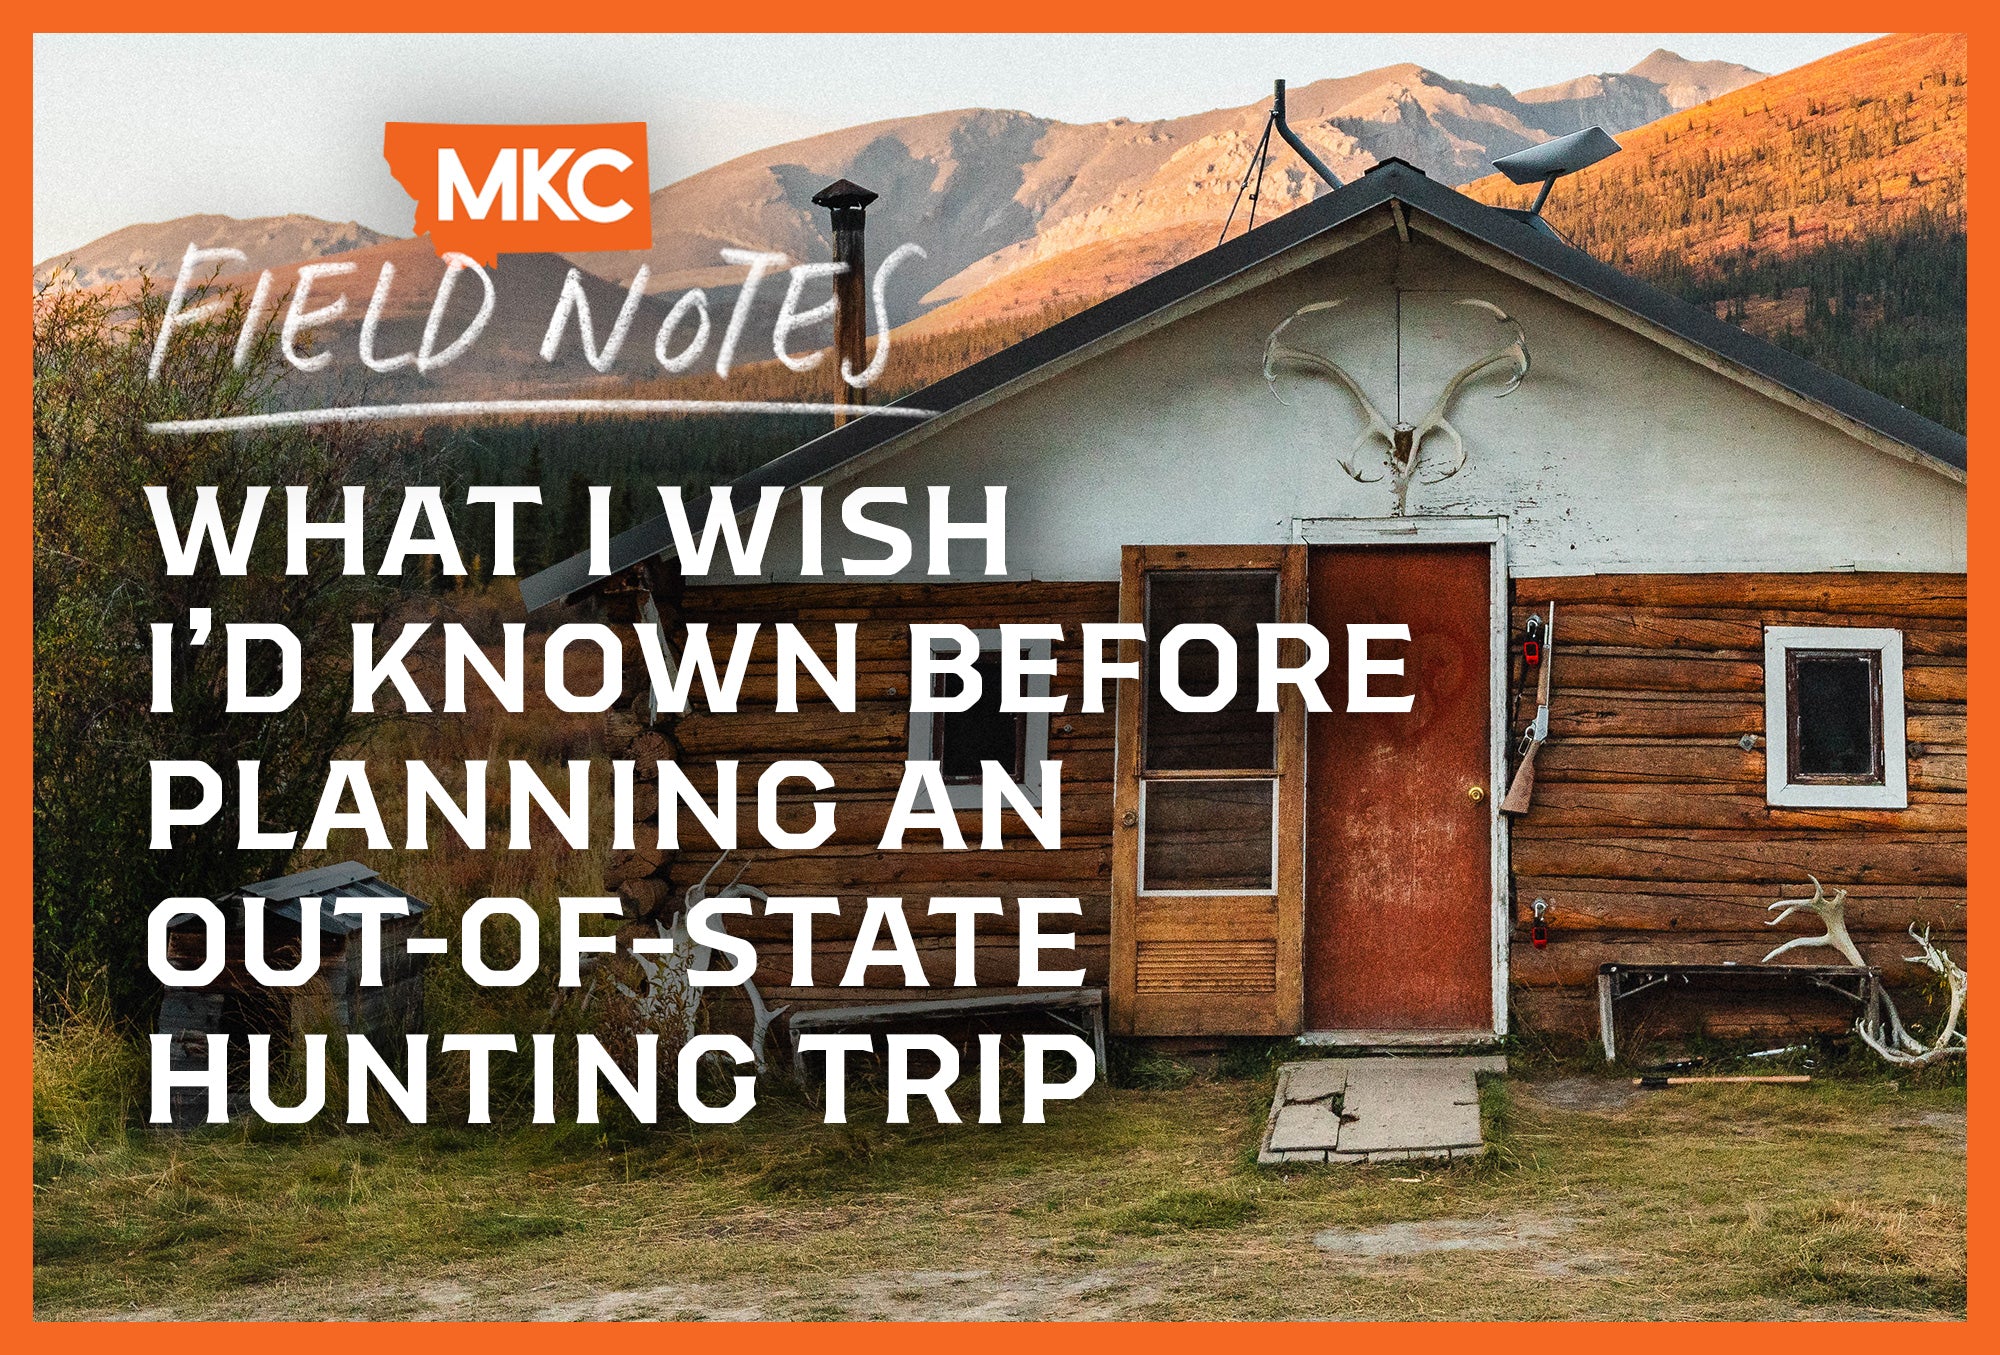 A hunting cabin in the woods with text about planning an out-of-state hunting trip.